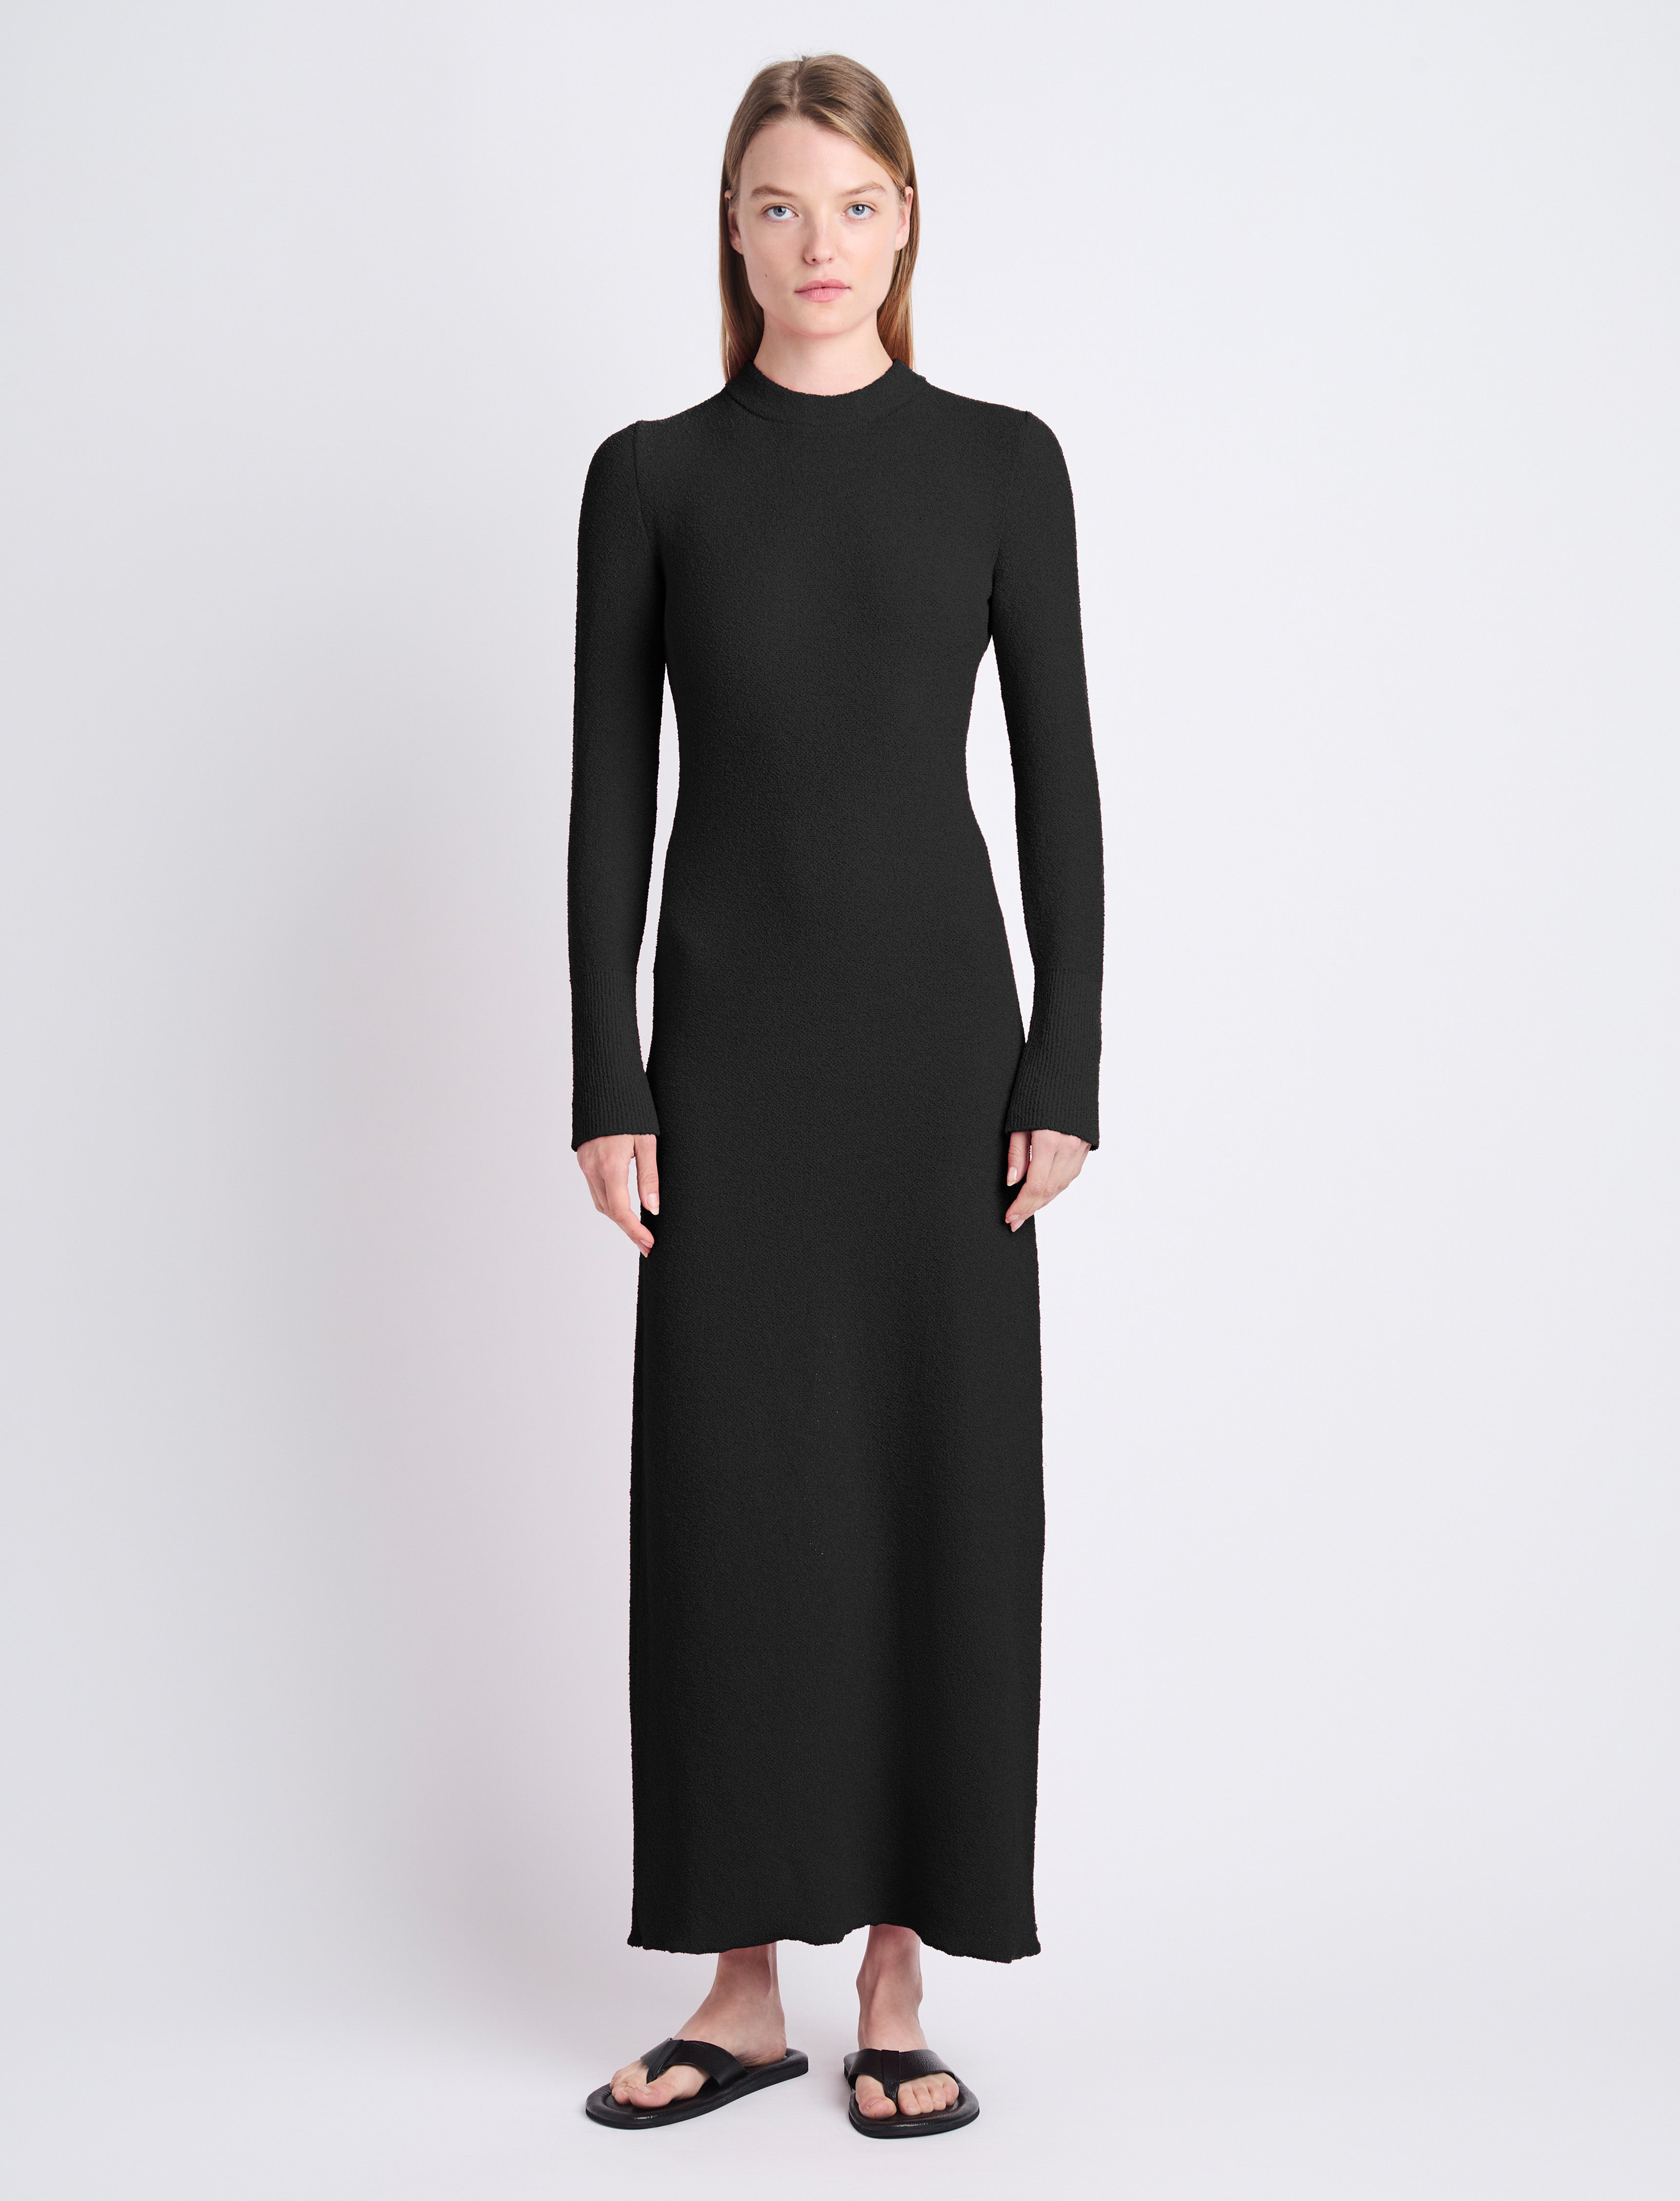 Proenza Schouler White Label cut-out detail V-neck knitted dress - Black